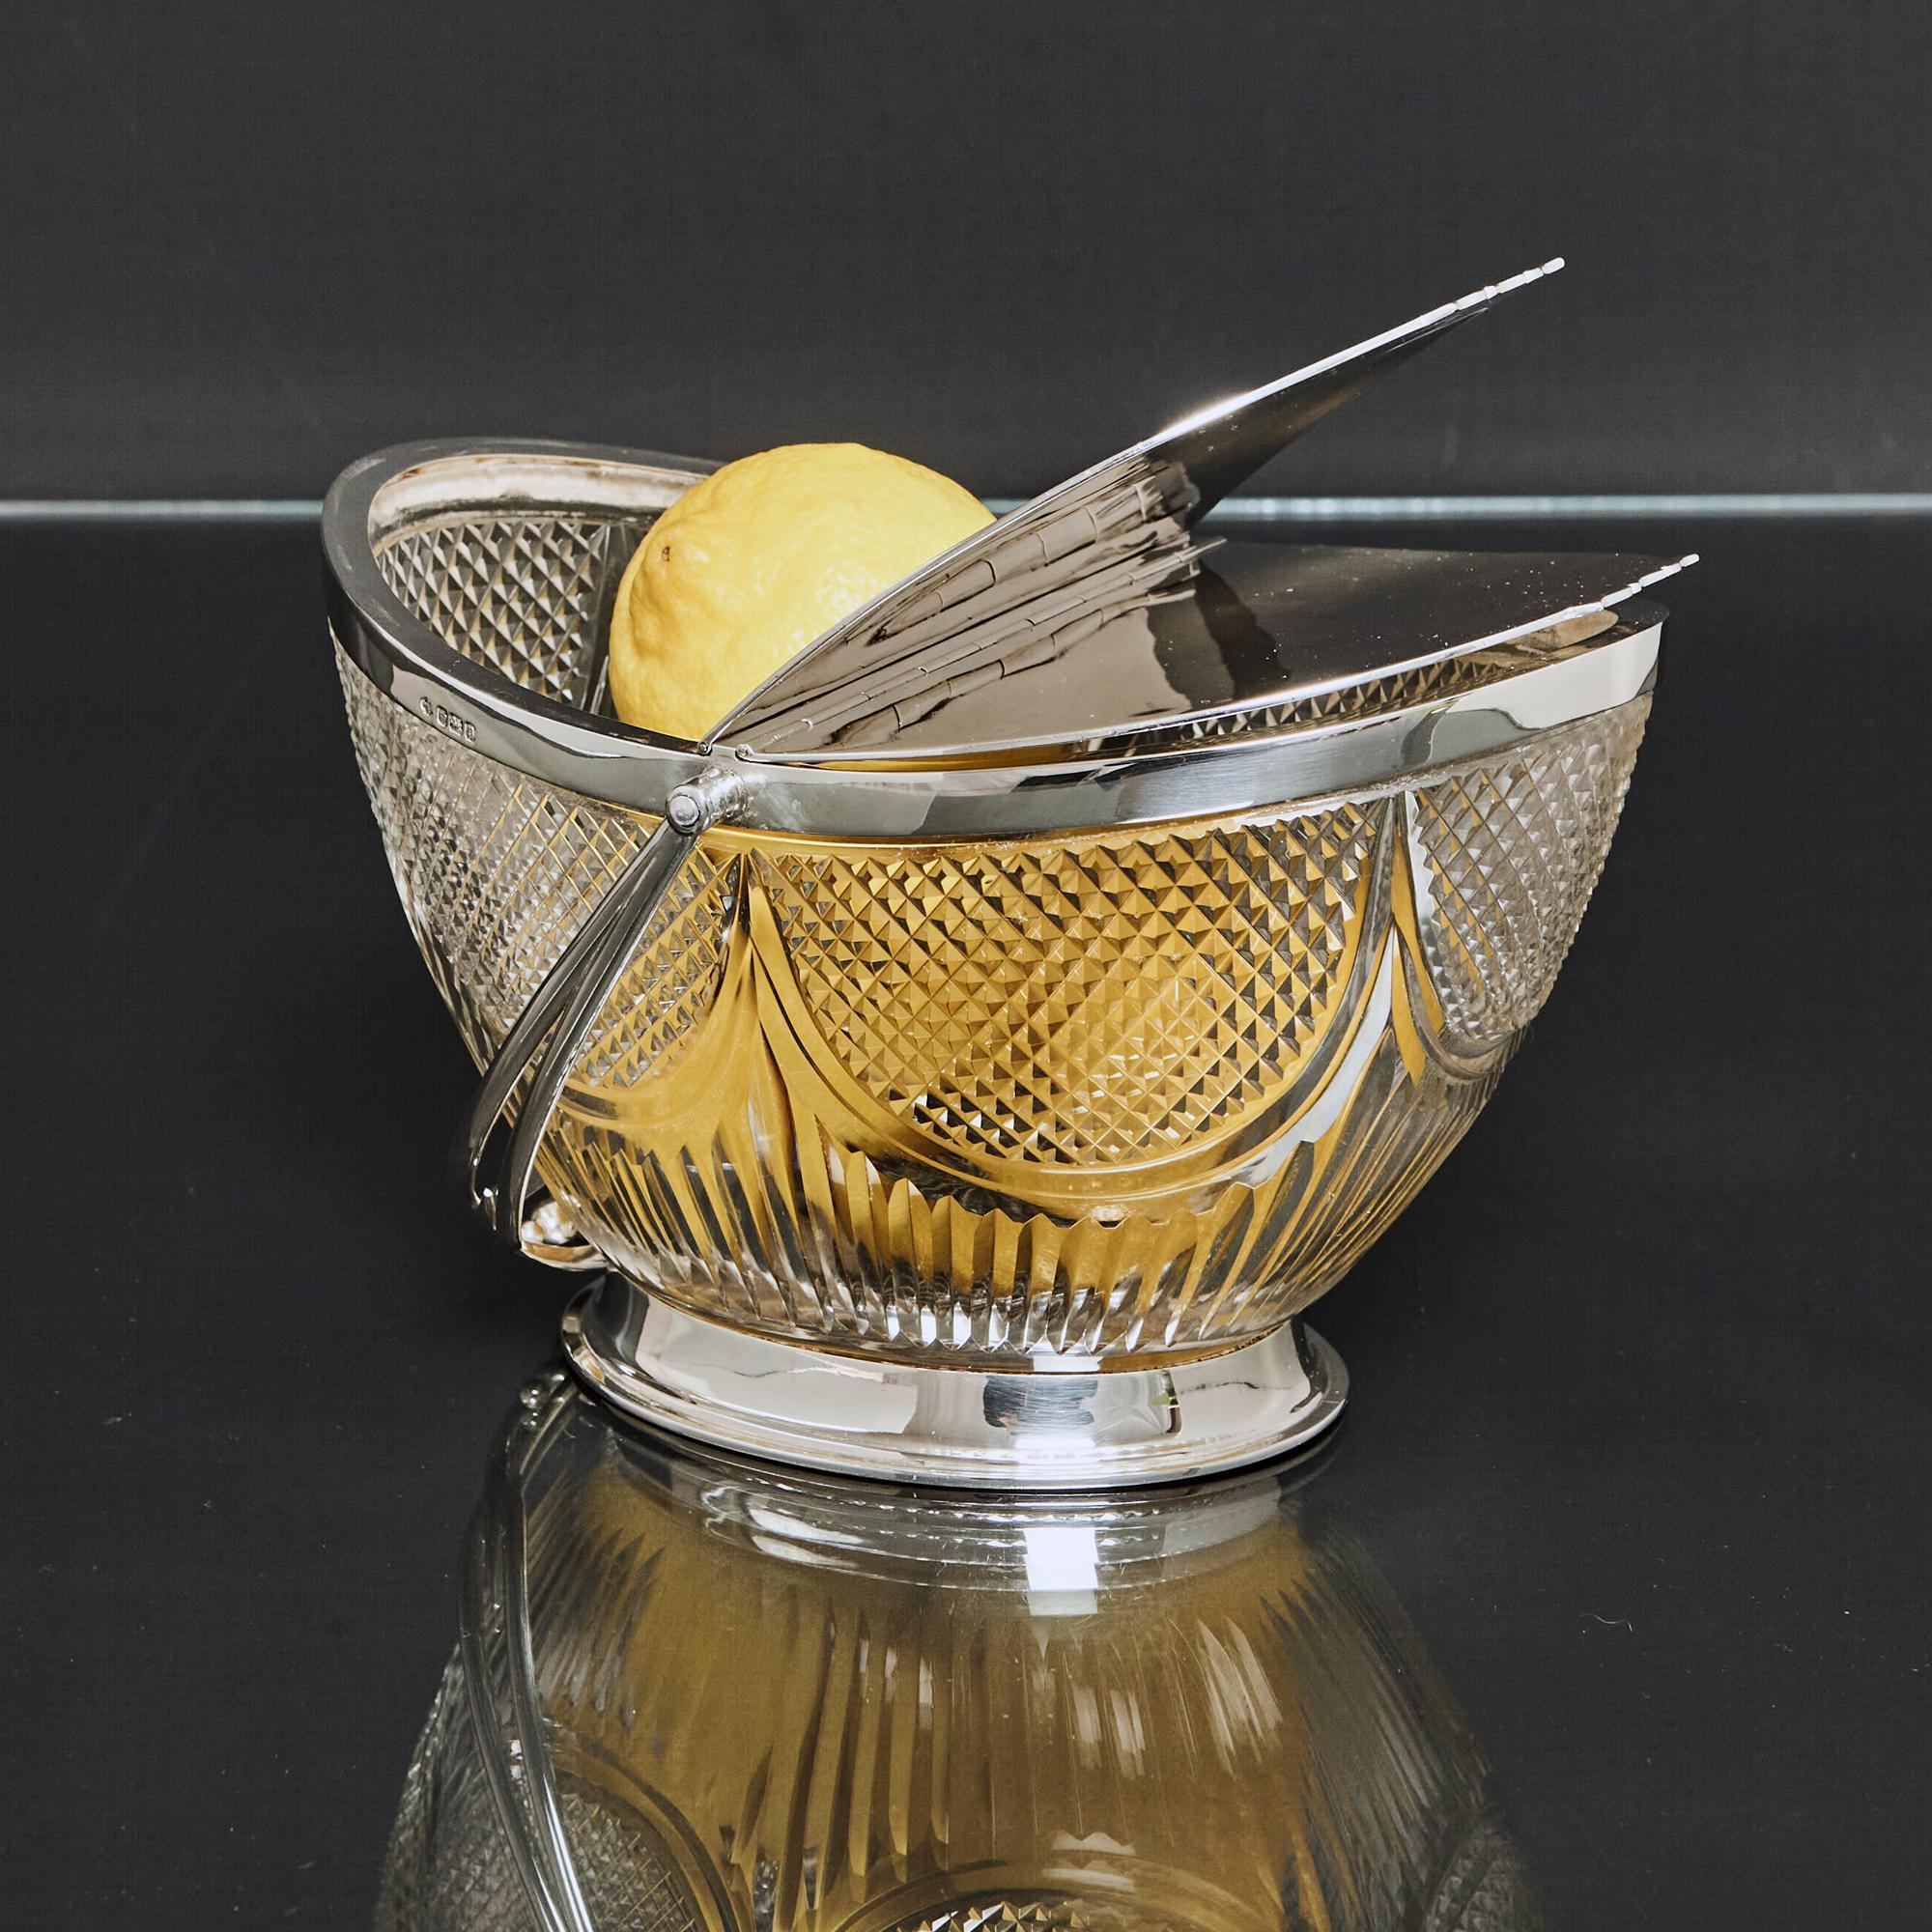 Edwardian, antique cut glass box of oval, boat-shaped form - a fruit basket or biscuit box. The cut glass body is decorated with elliptical panels of a crisply cut diamond pattern, and vertical fluting. The body is fitted with silver mounts, a swing